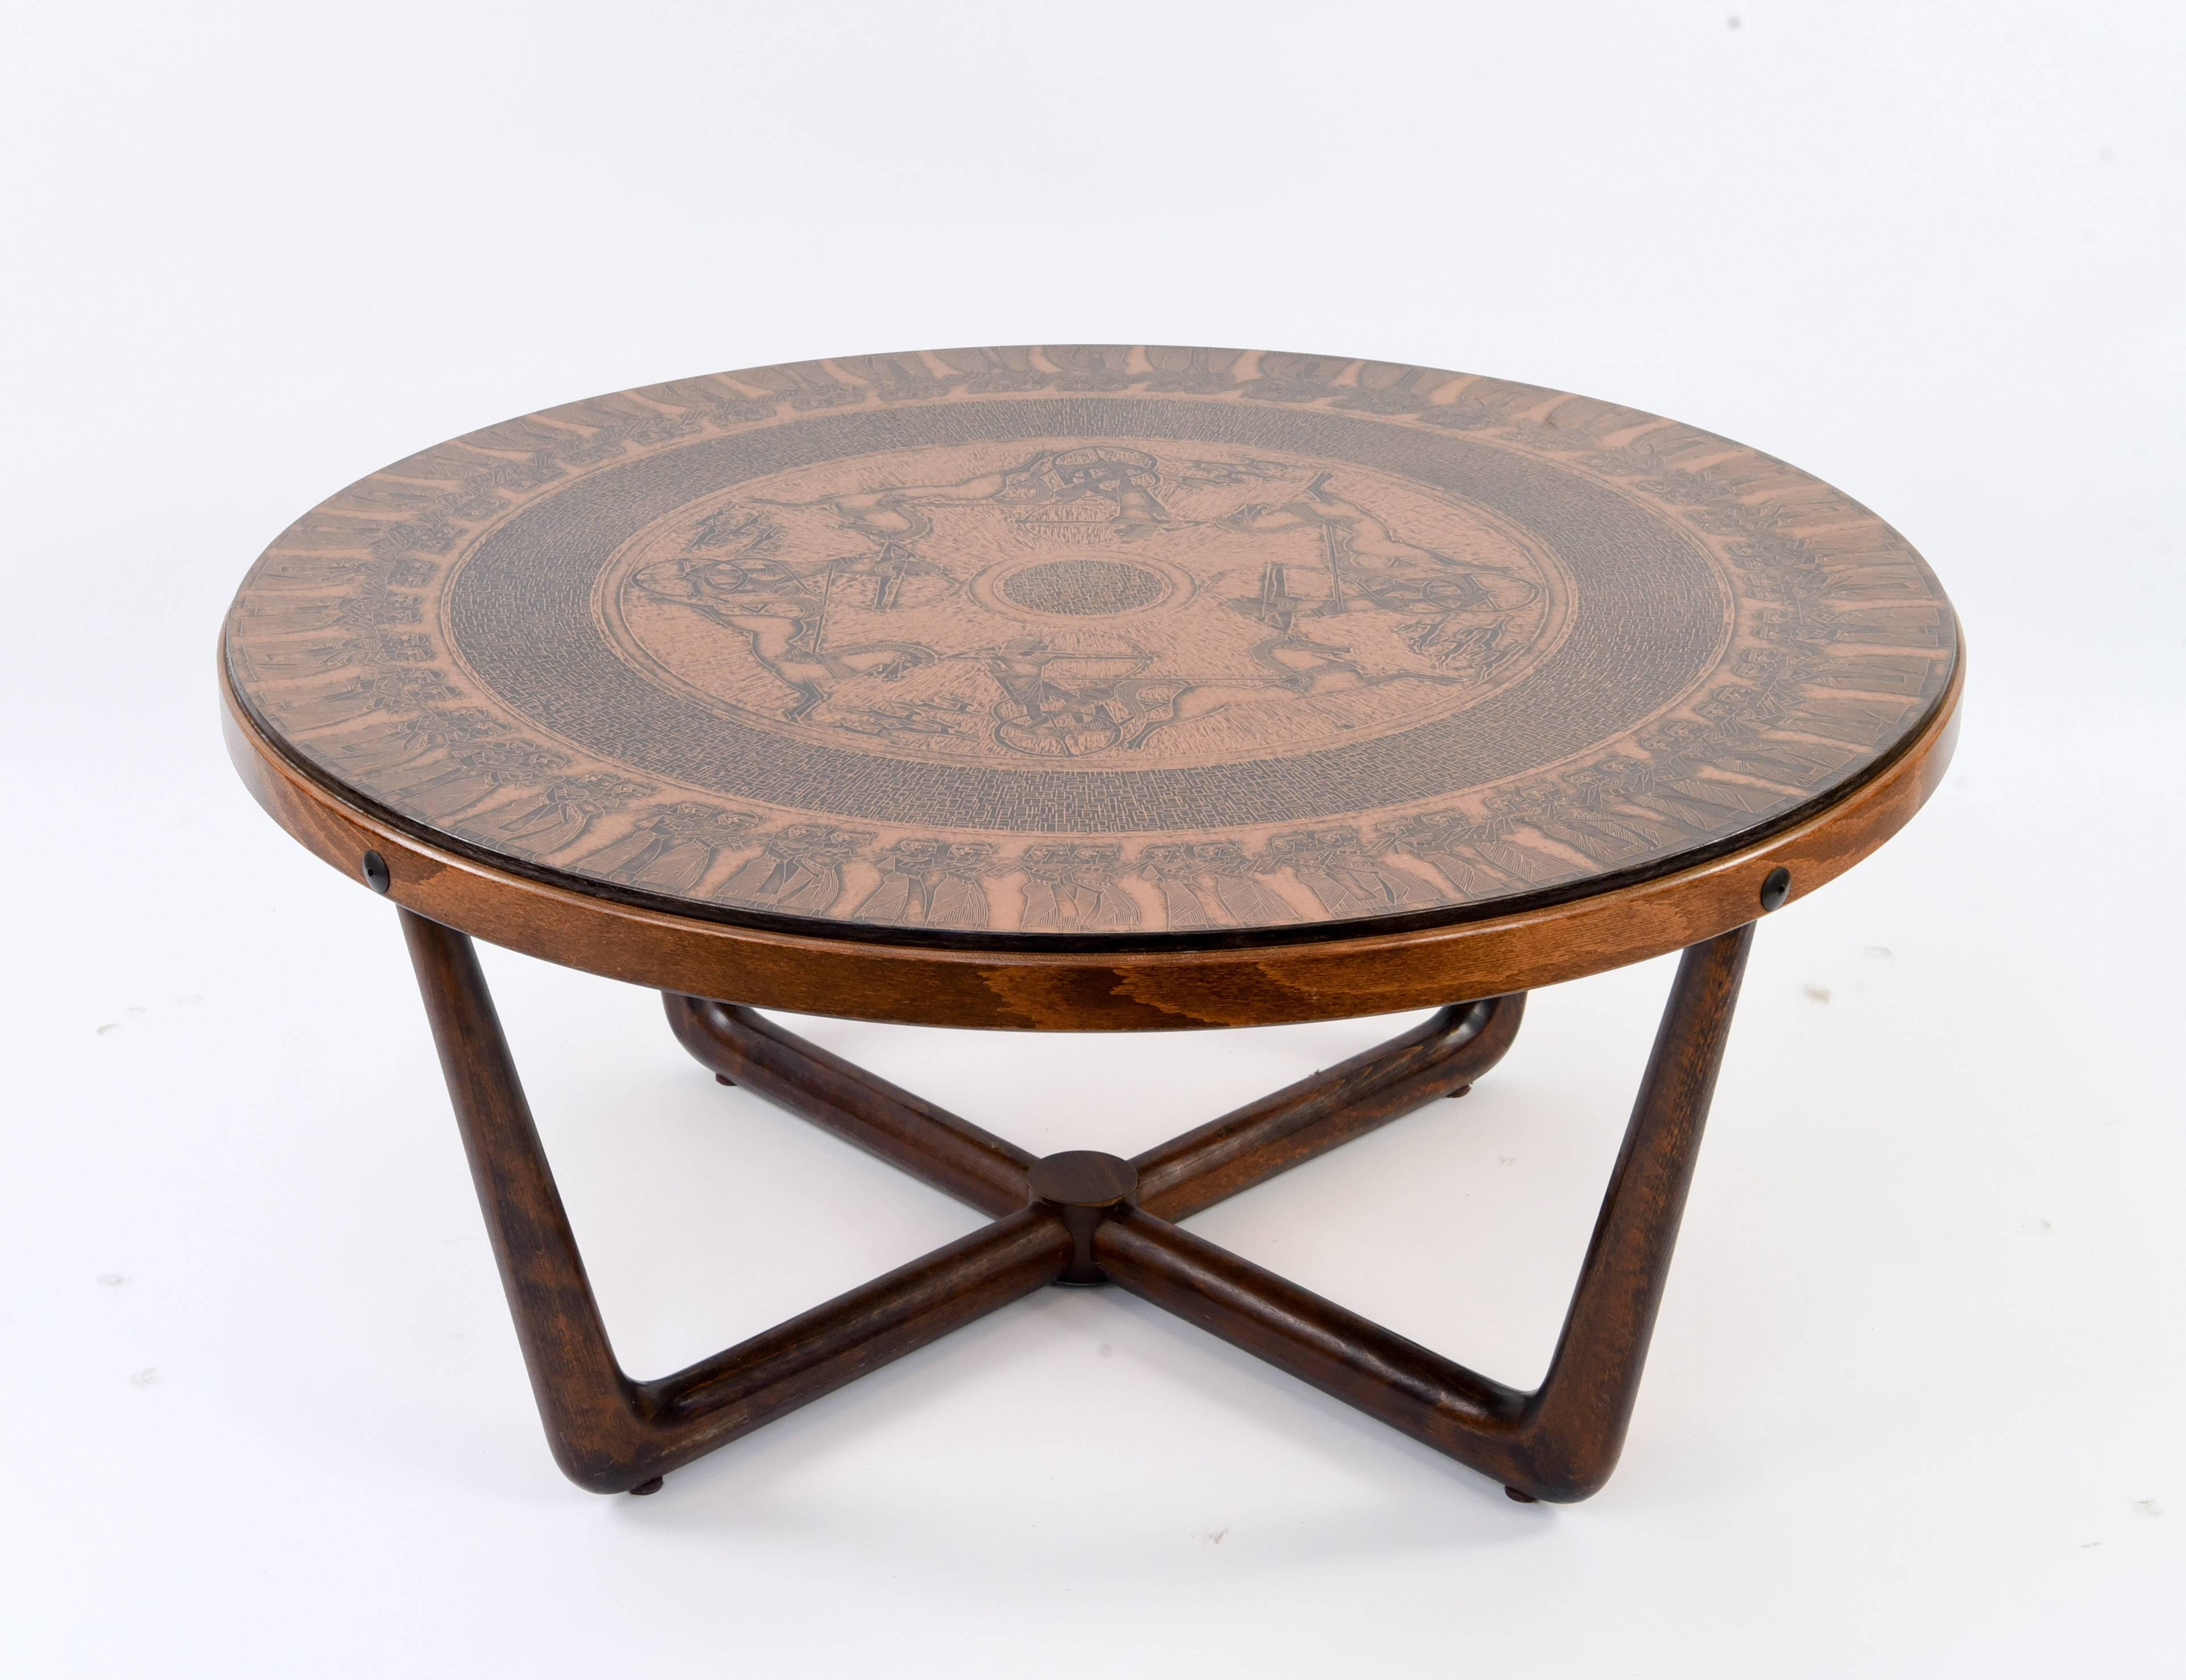 This coffee table features a stamped copper top in neo-Egyptian themes. Crafted by Vad Trevare Fabric Norge, circa 1970. Base in solid, stained beechwood.